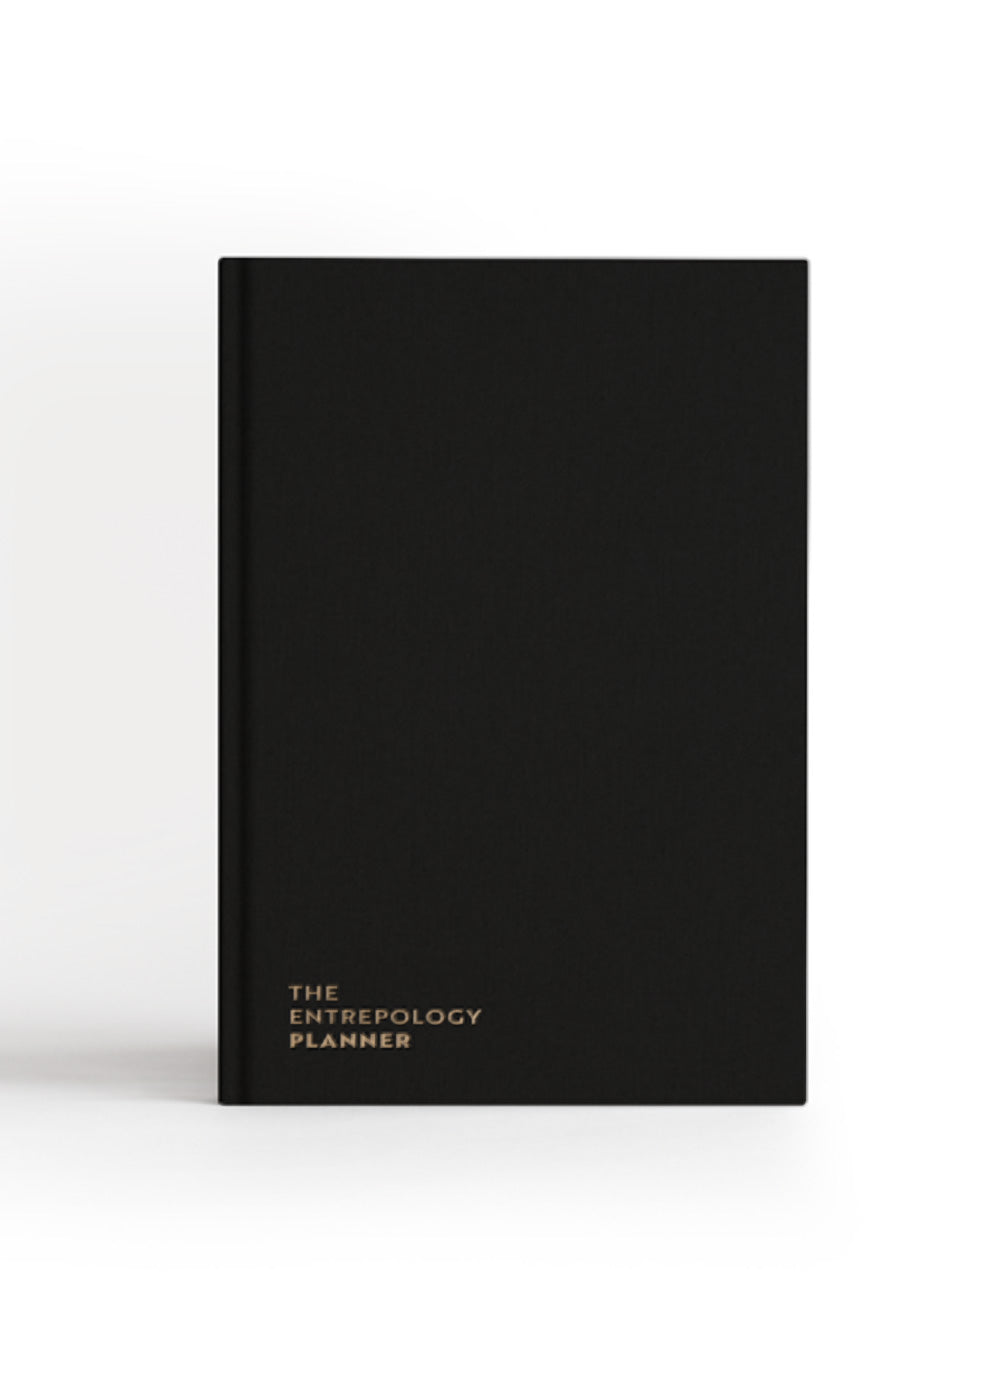 The Entrepology Planner is a complete time, productivity and balance building system designed to provide you with access to your highest potential. This quarterly planner provides focus for 90-days of execution as well as weekly and daily action in your personal and professional life. 